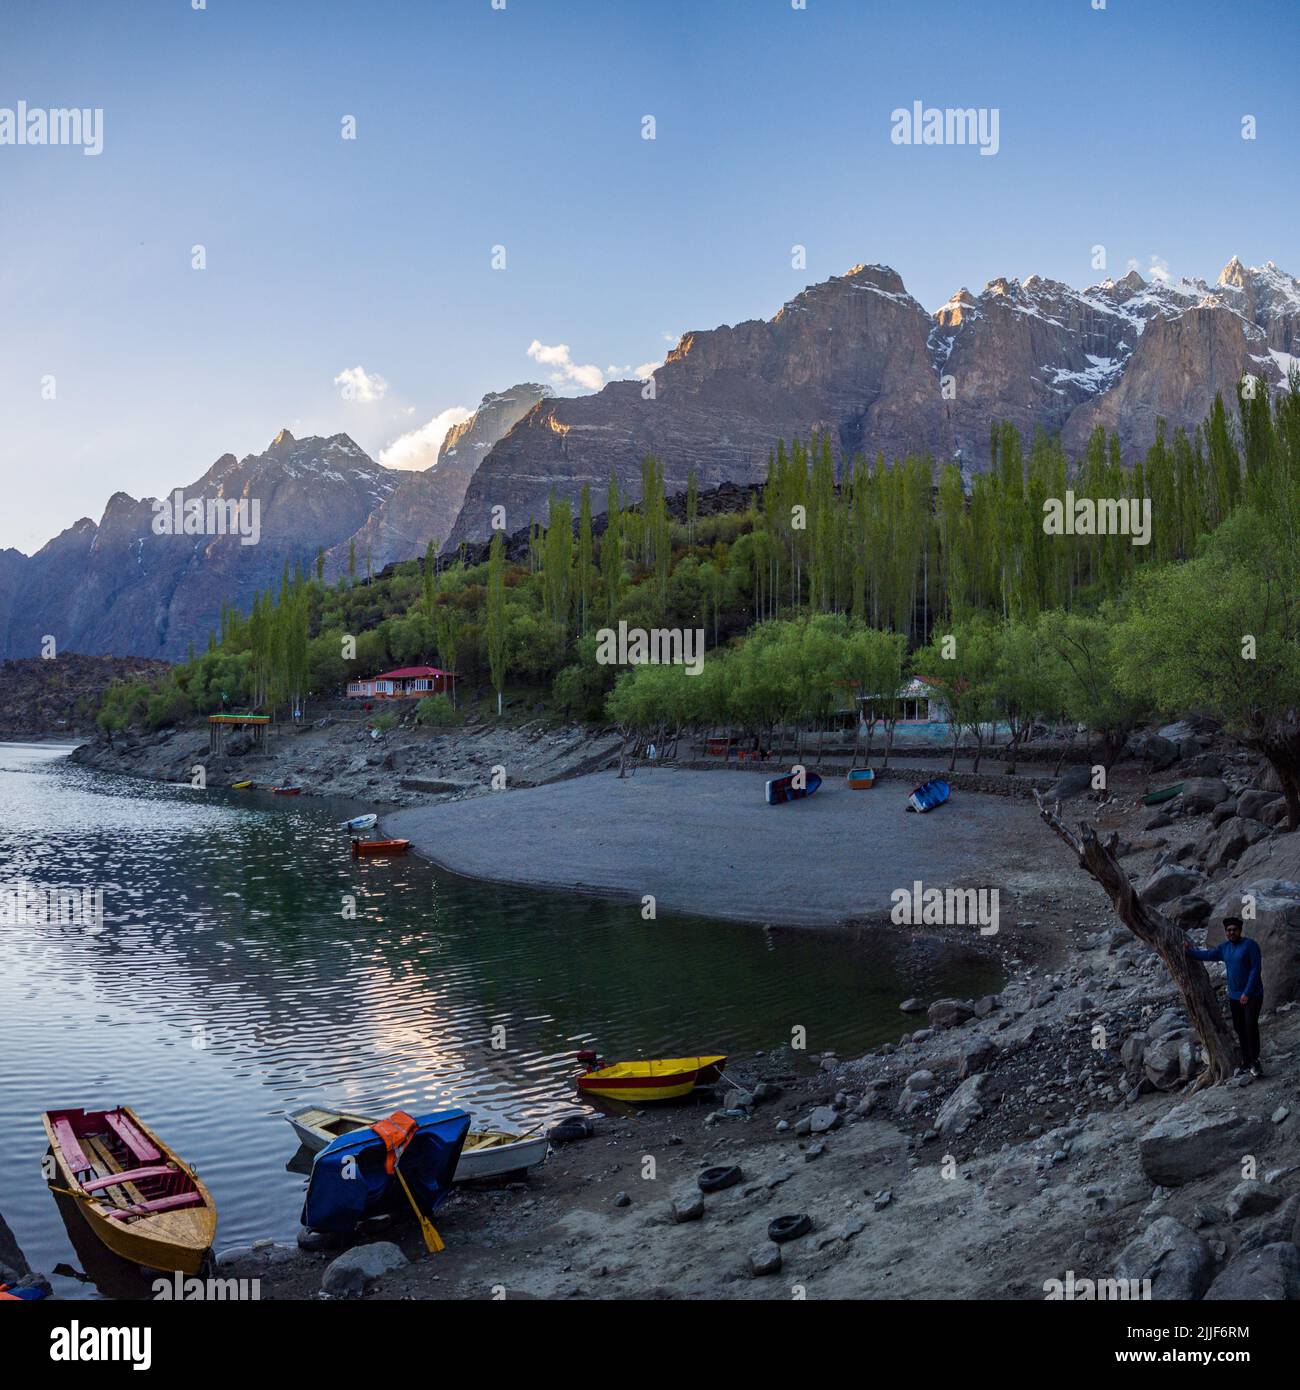 The Upper Kachura lake with a forest and boats, a male on the coast surrounded by rocky mountains in Skardu, Pakistan Stock Photo